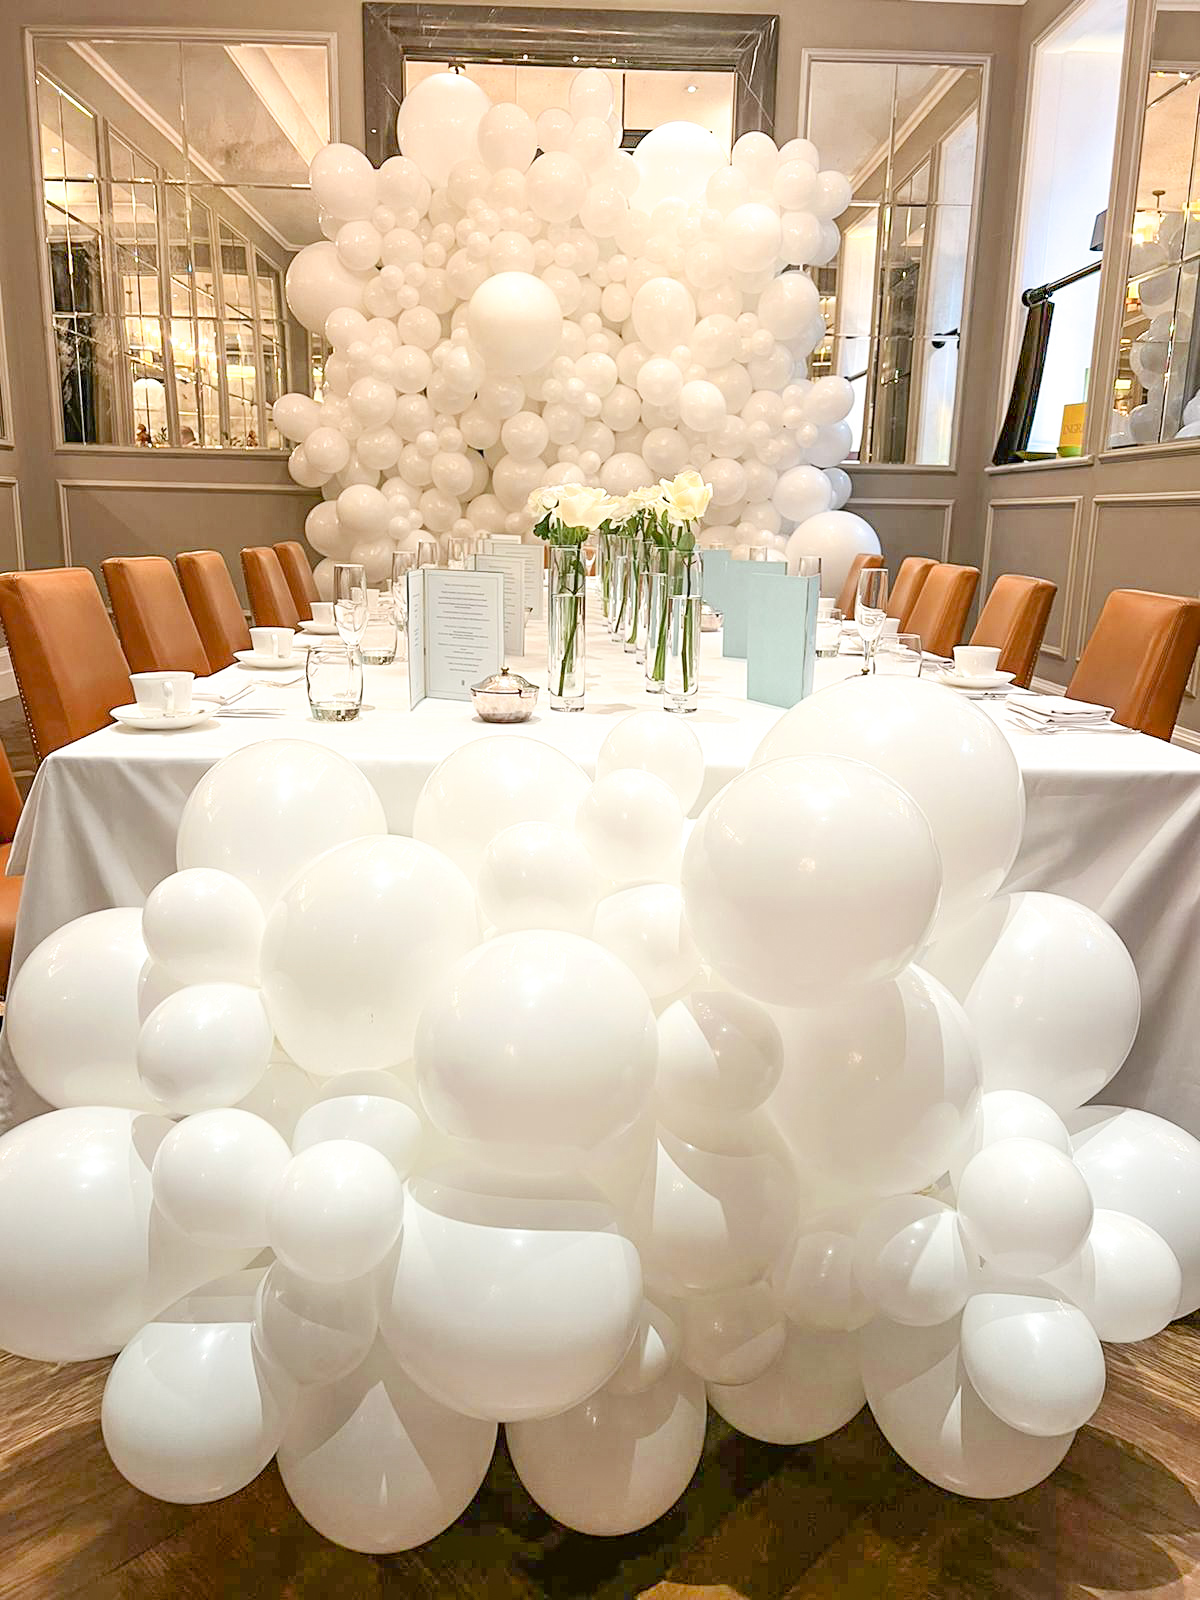 Baby Shower - Limelight Access - Corinthia London - Northall PDR (7)